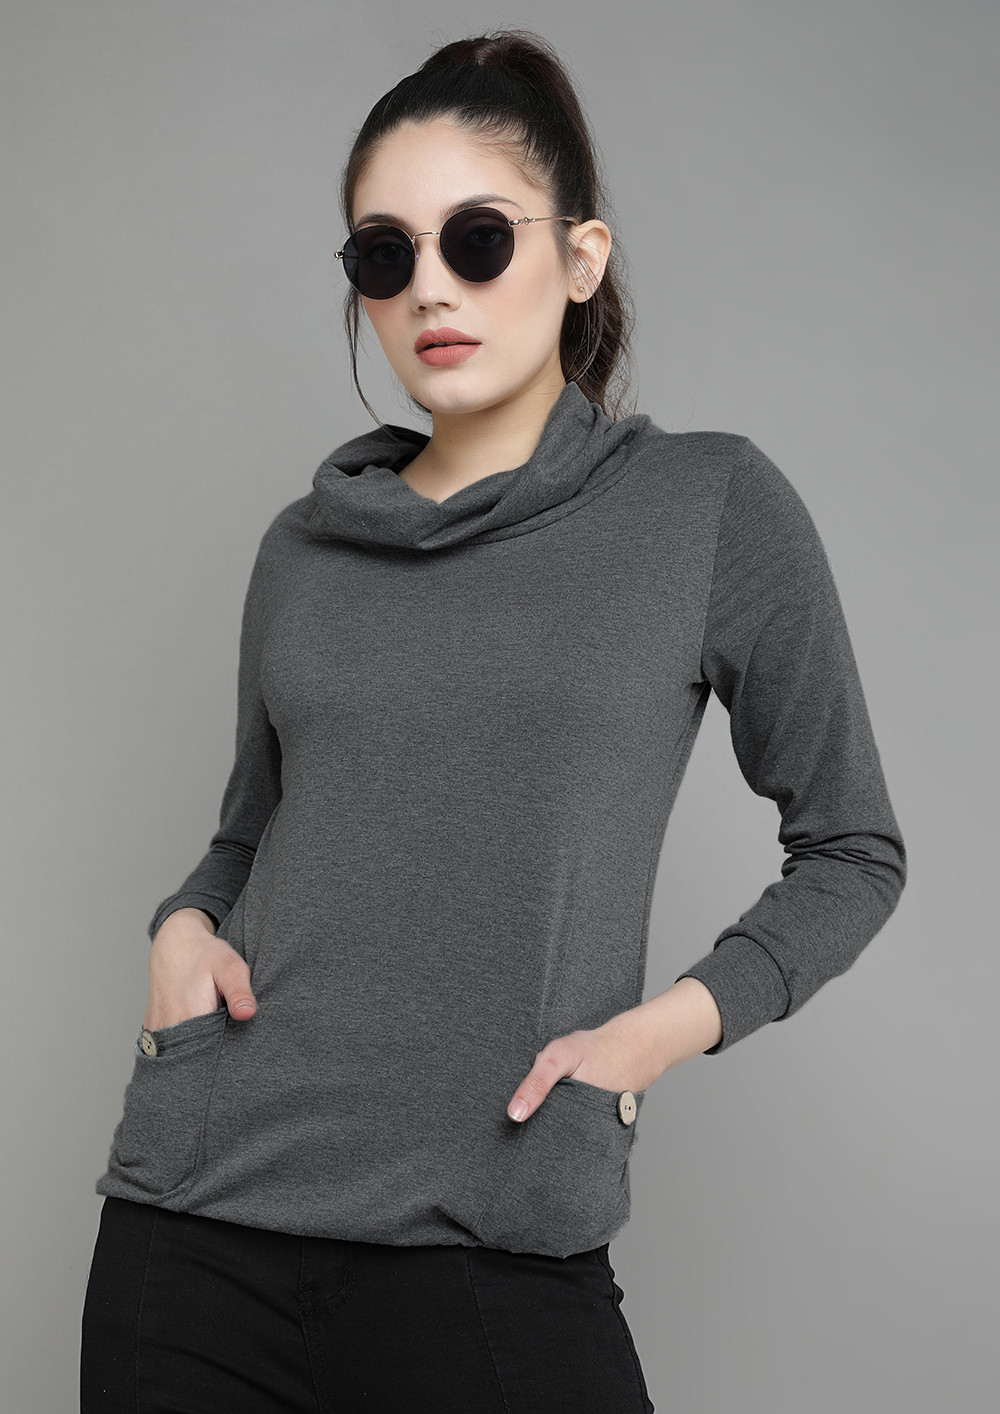 OUT FOR THE CHILL DARK GREY SWEATSHIRT